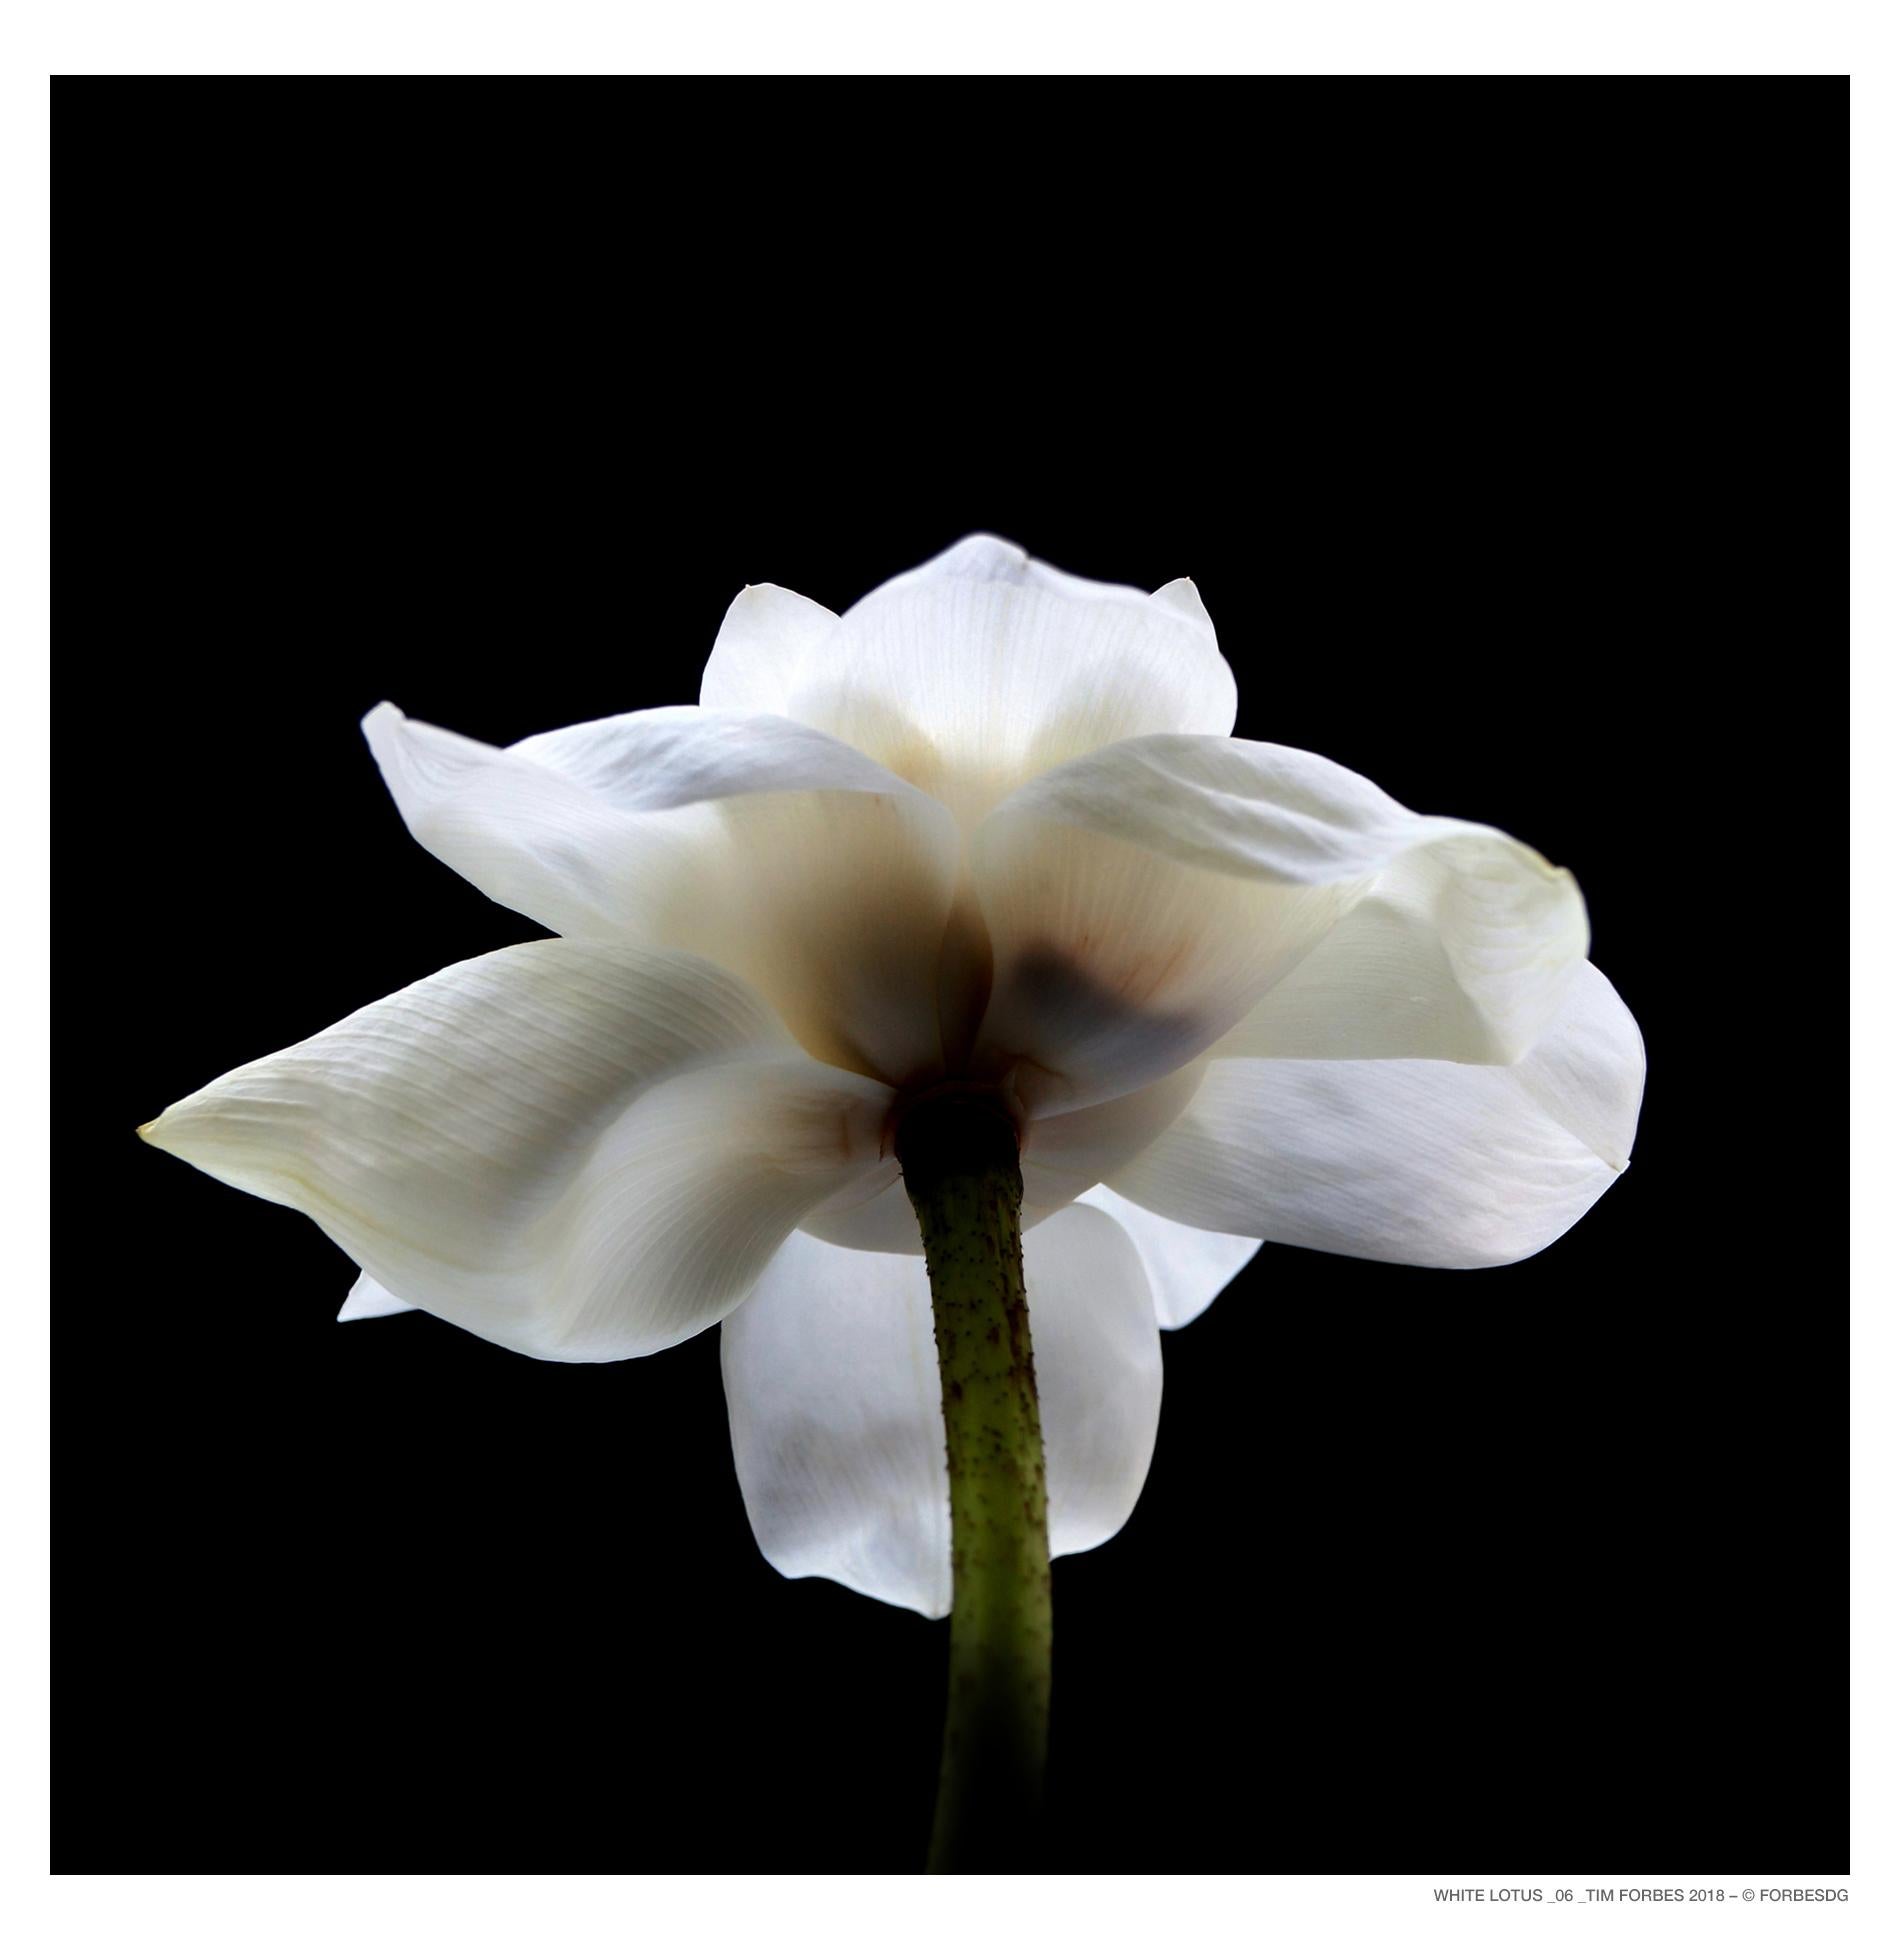 White Lotus_6 - Photograph by Tim Forbes